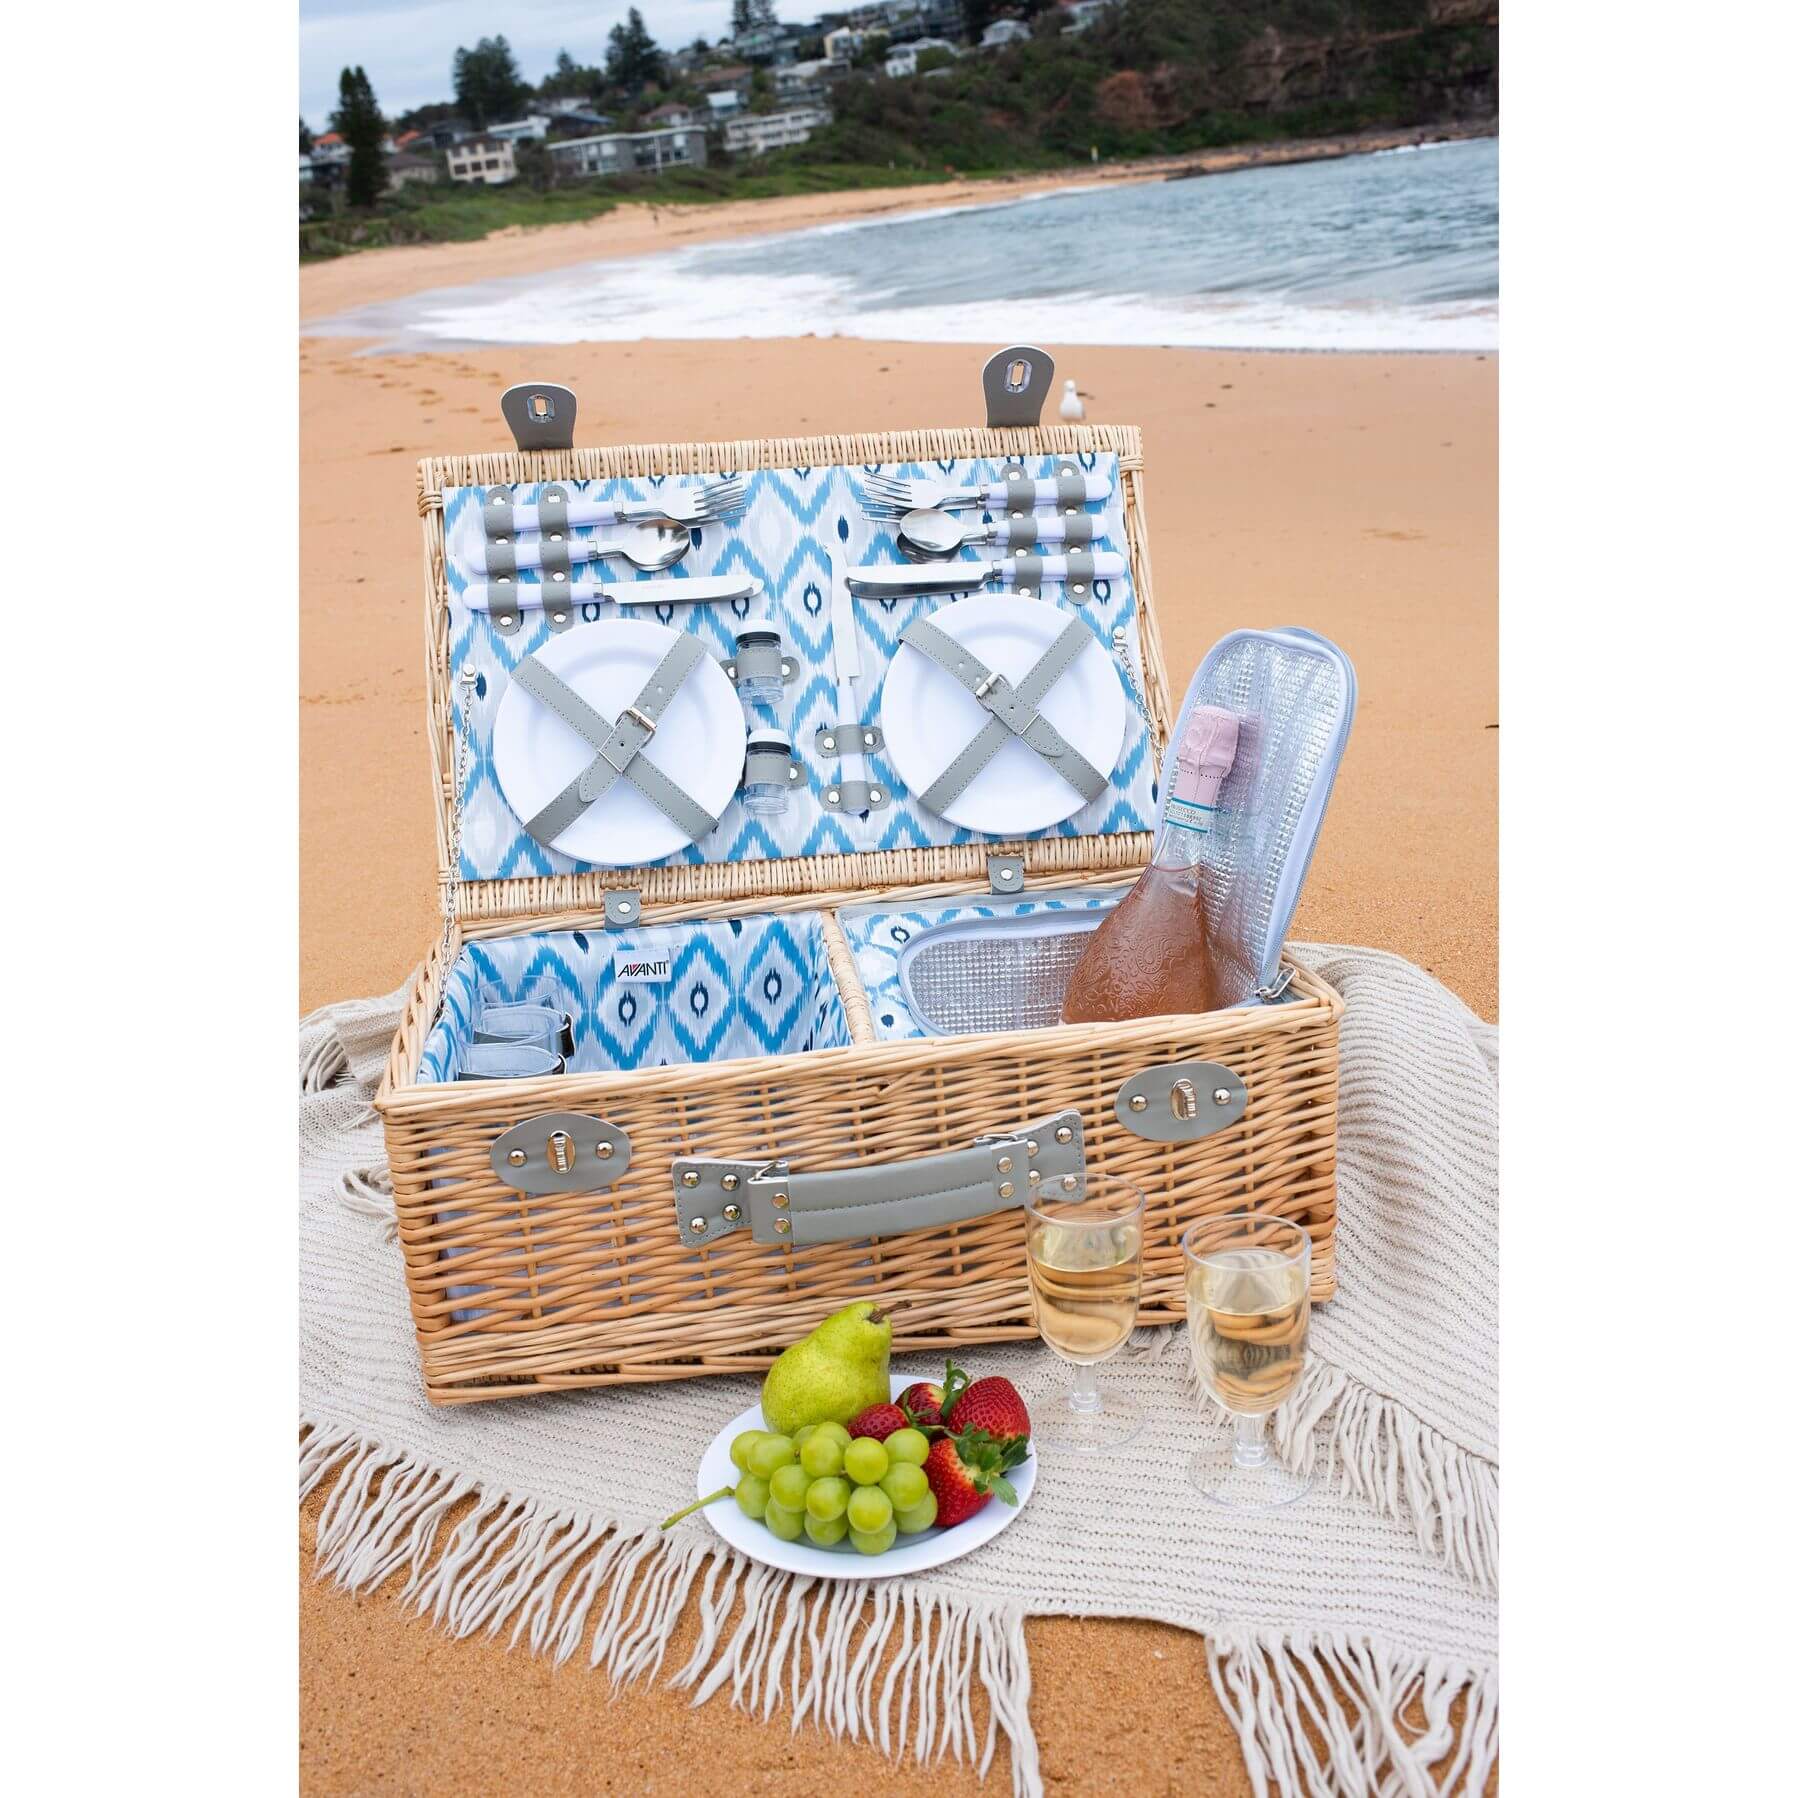 A wicker insulated picnic basket on a beach with food, wine and a picnic rug